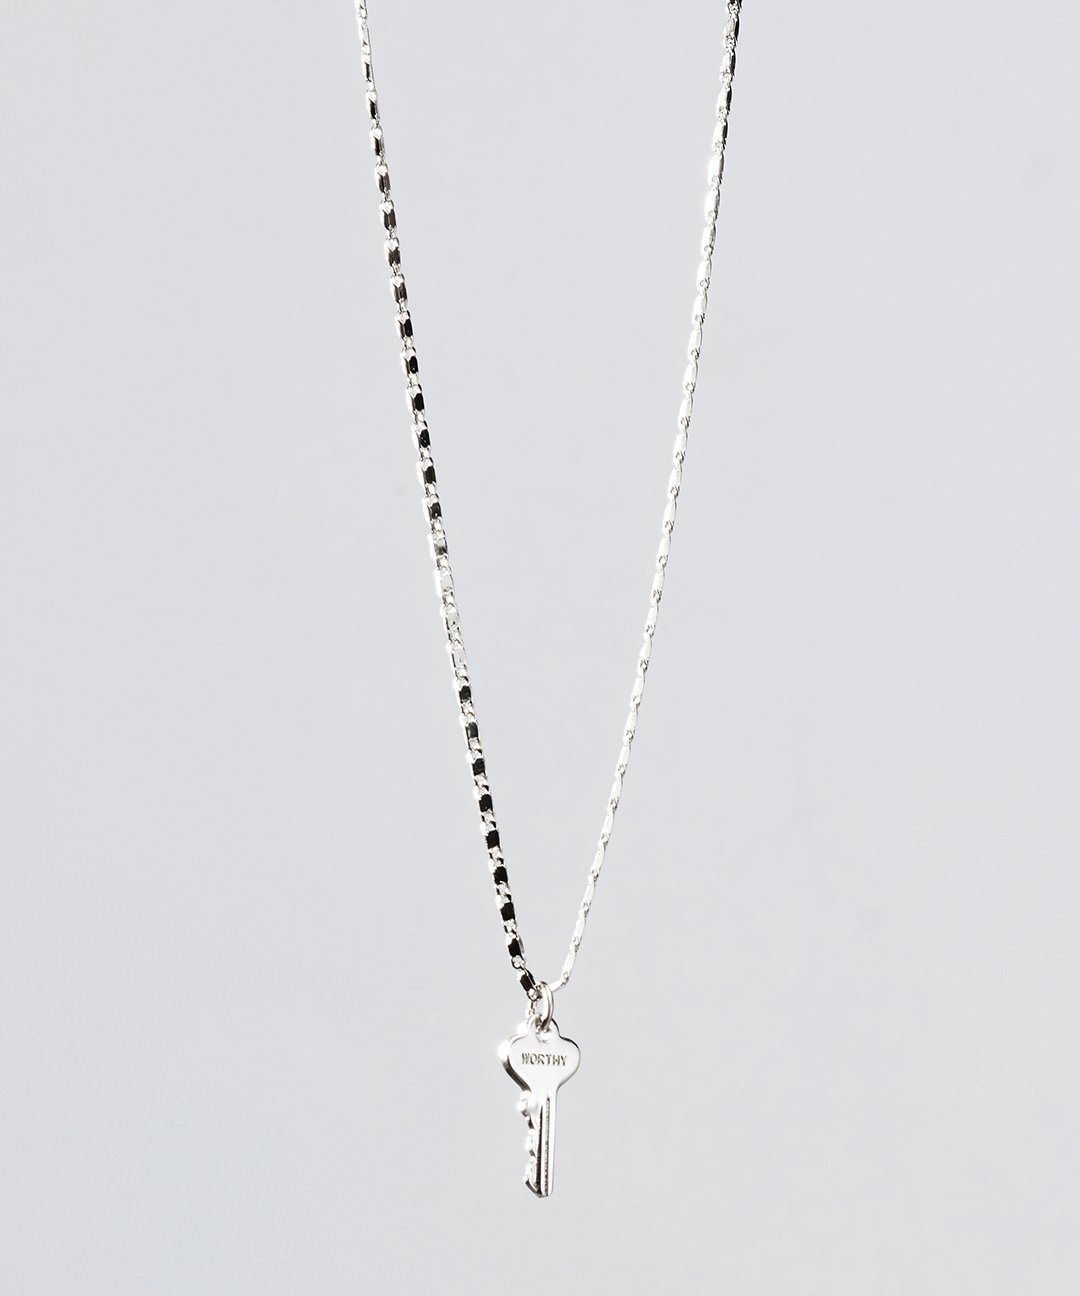 Petite Key Necklace Necklaces The Giving Keys WORTHY Silver